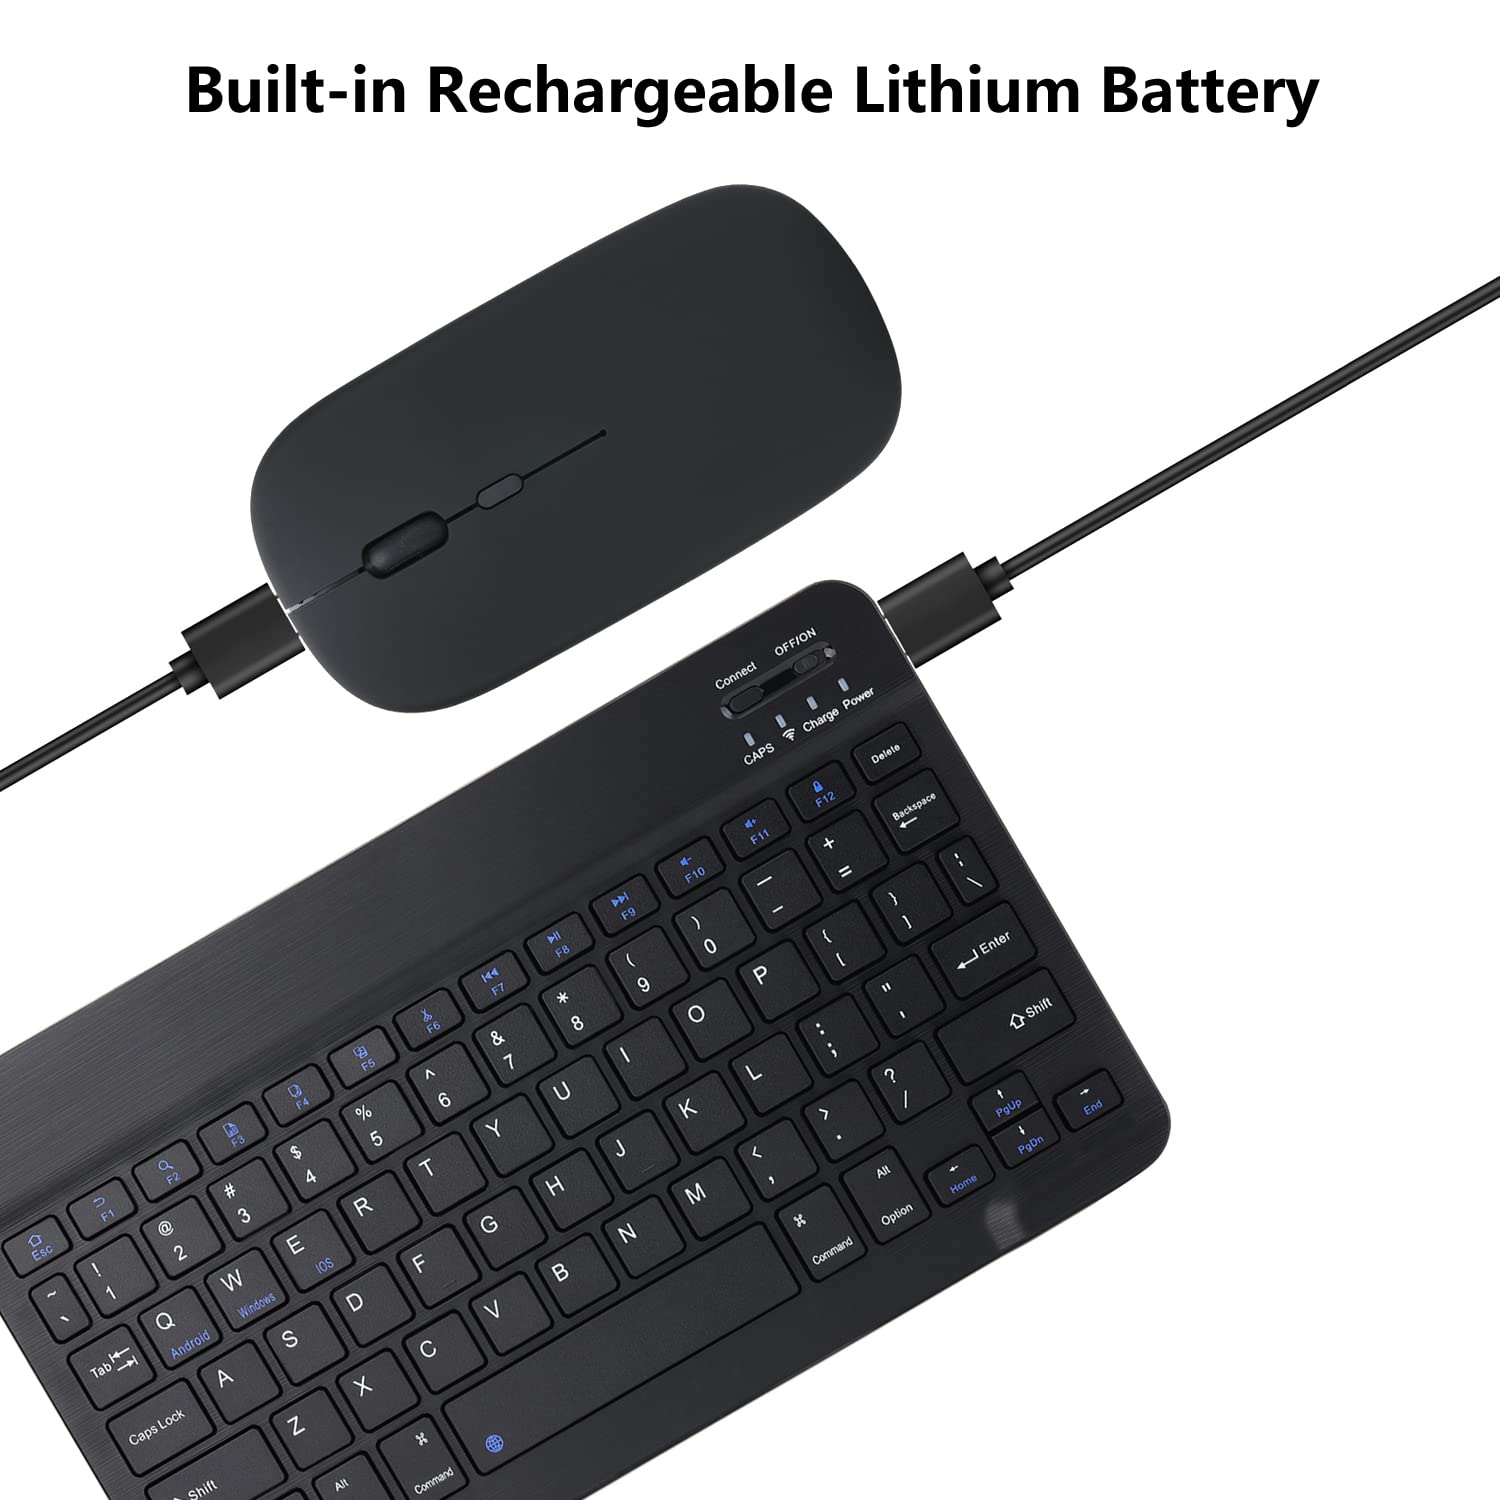 Rechargeable Bluetooth Keyboard and Mouse Combo Ultra-Slim Portable Compact Wireless Mouse Keyboard Set for Android Windows Tablet Cell Phone iPhone iPad Pro Air Mini, iPad OS/iOS 13 and Above (Black)